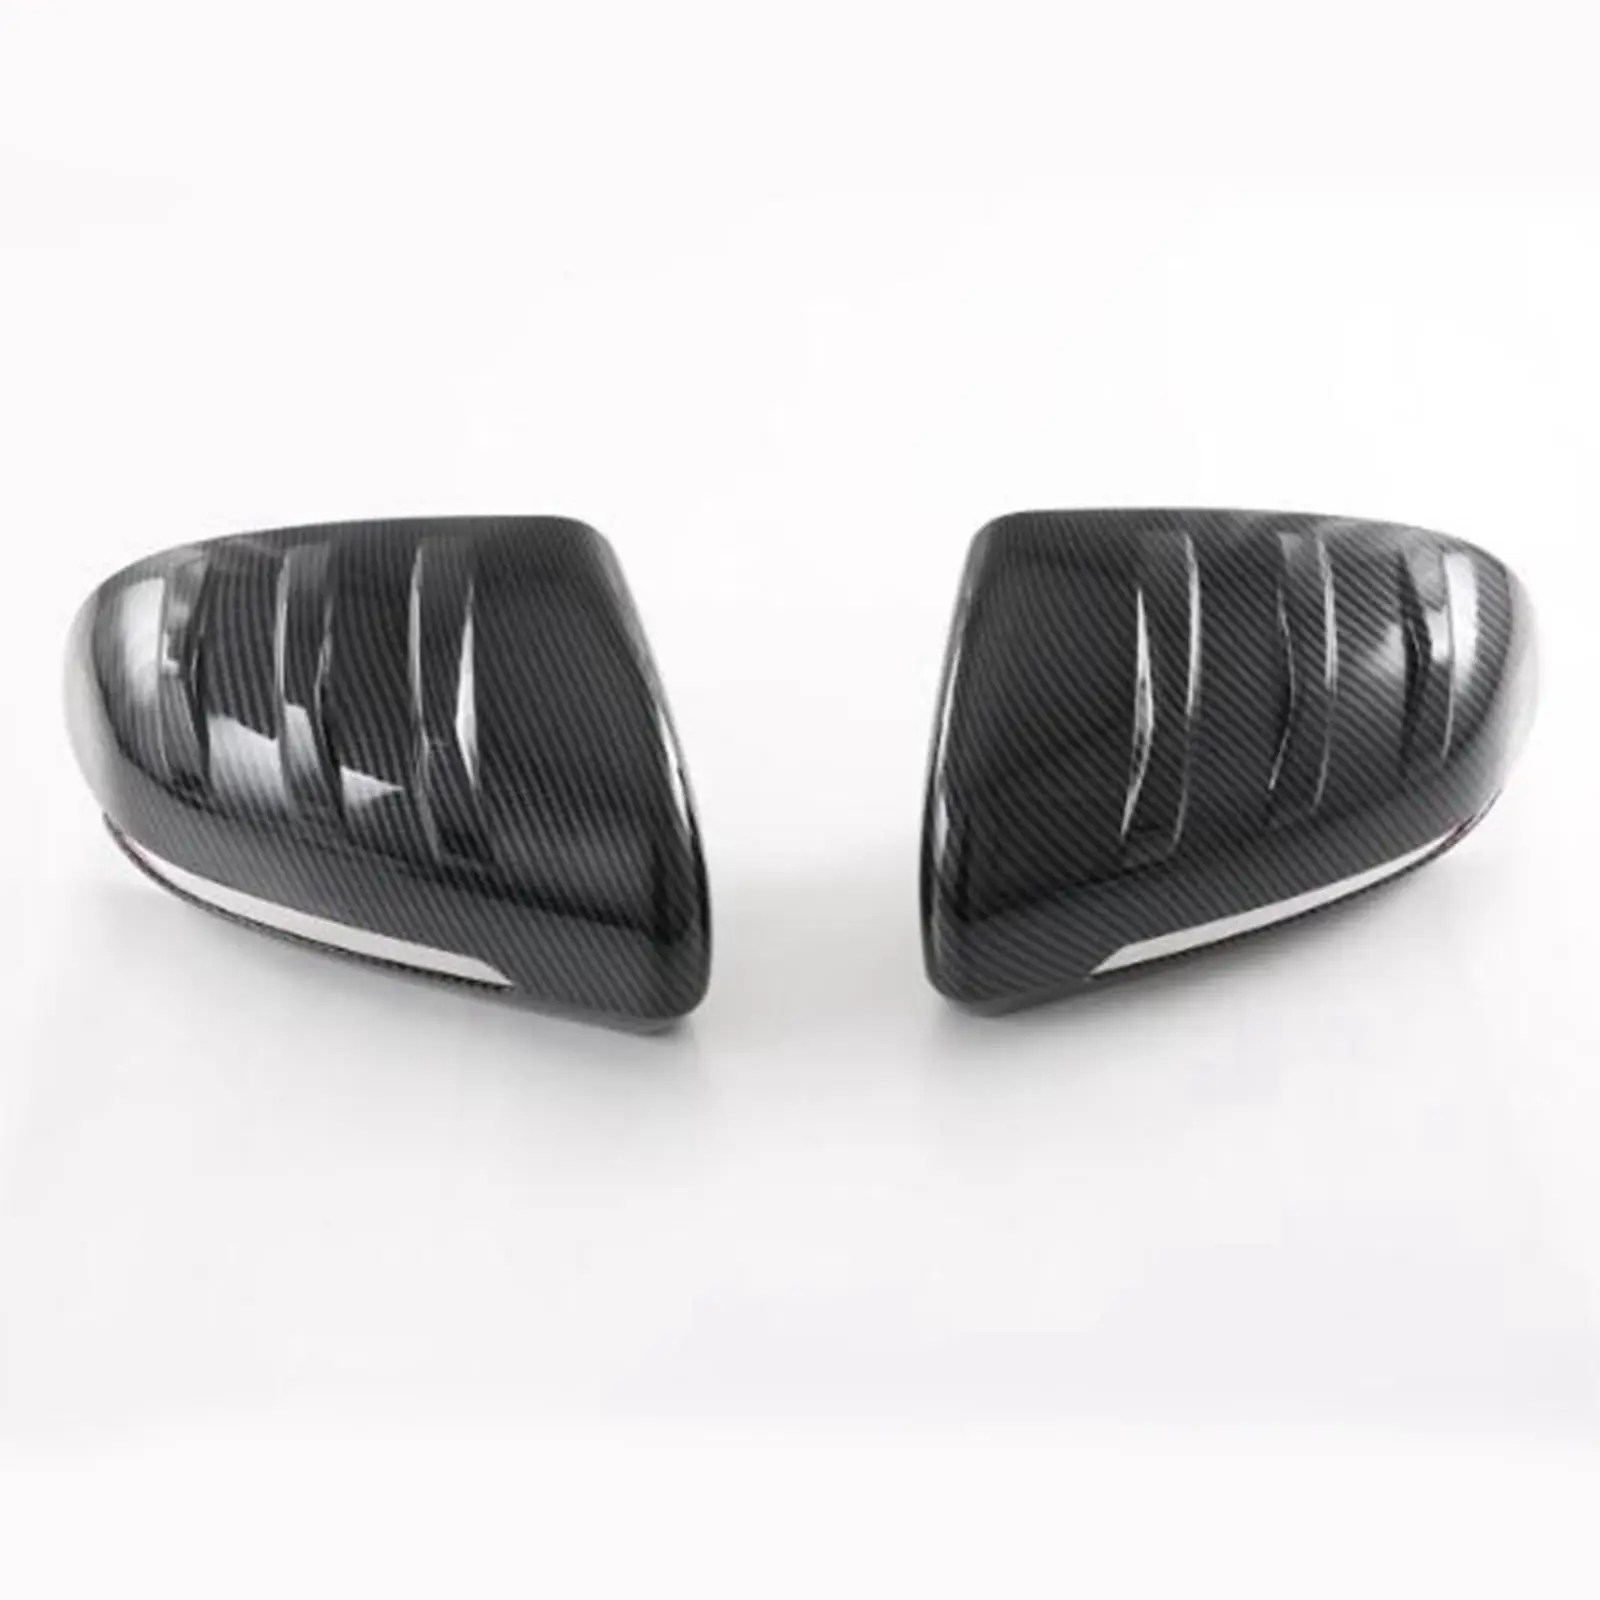 Rearview Side Mirror Covers Caps Trim Carbon Fiber Exterior Trim Protection Professional for Byd Atto 3 2022 Replacement